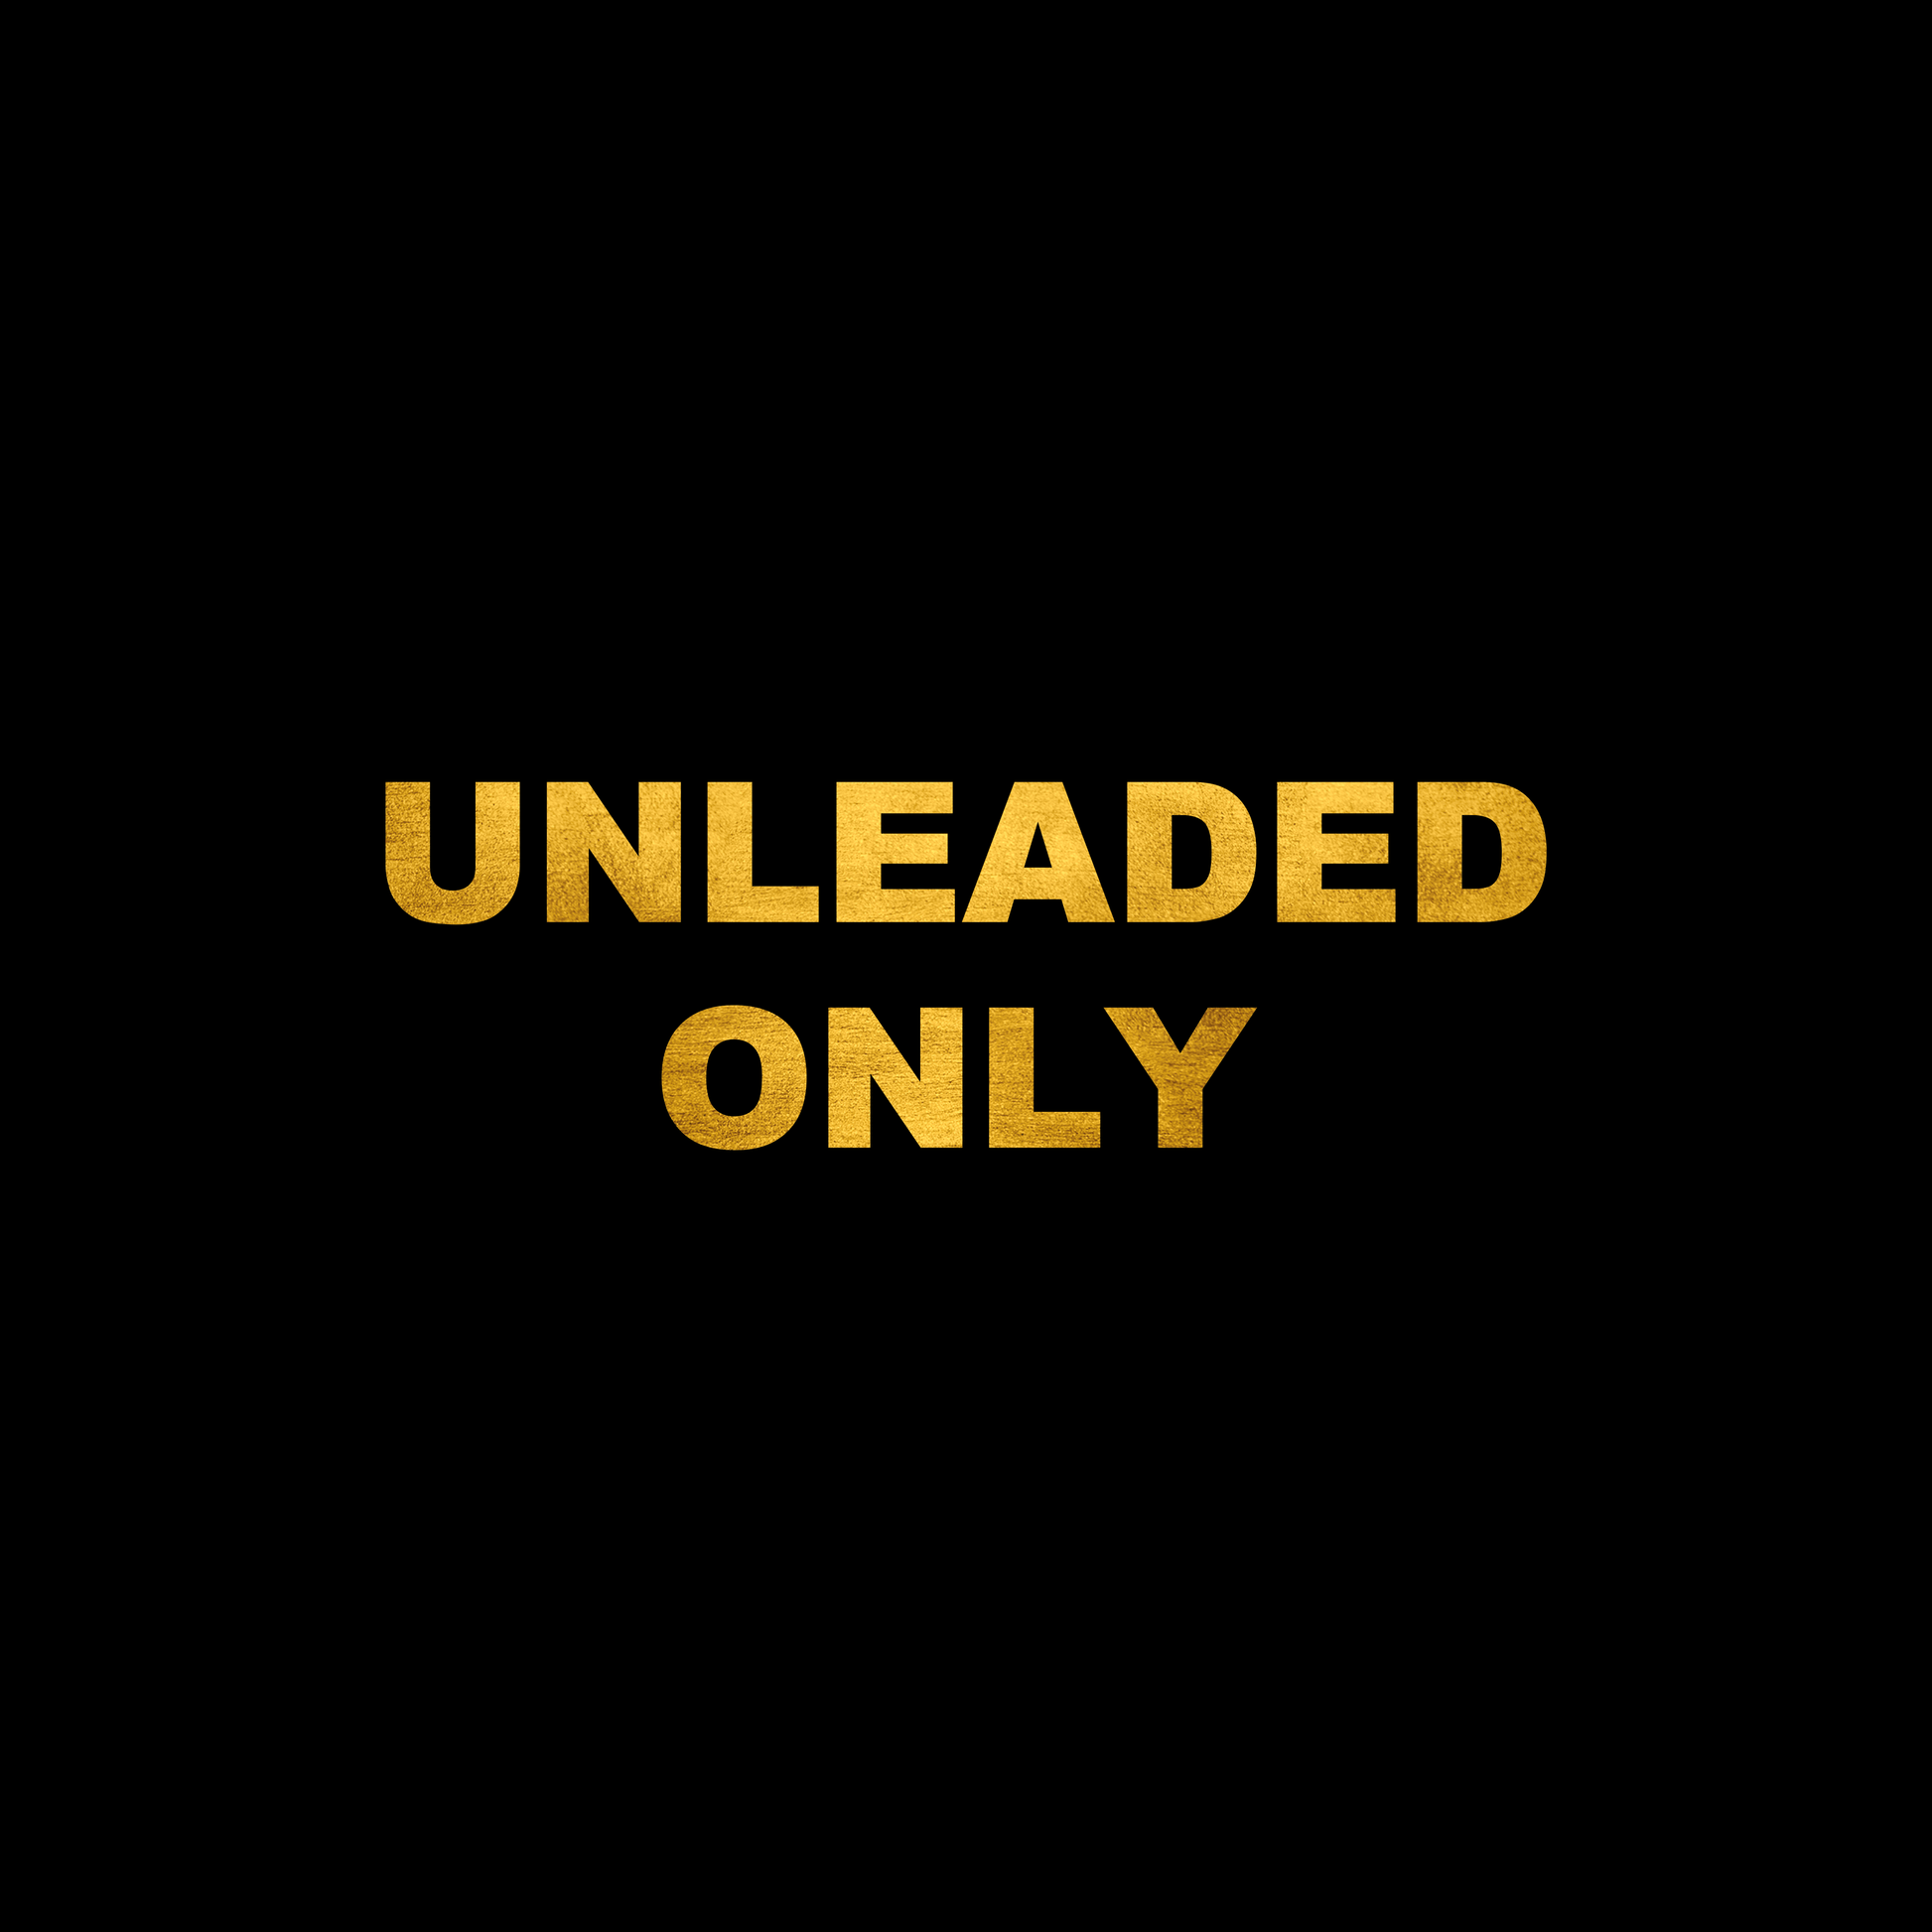 Unleaded only sticker decal